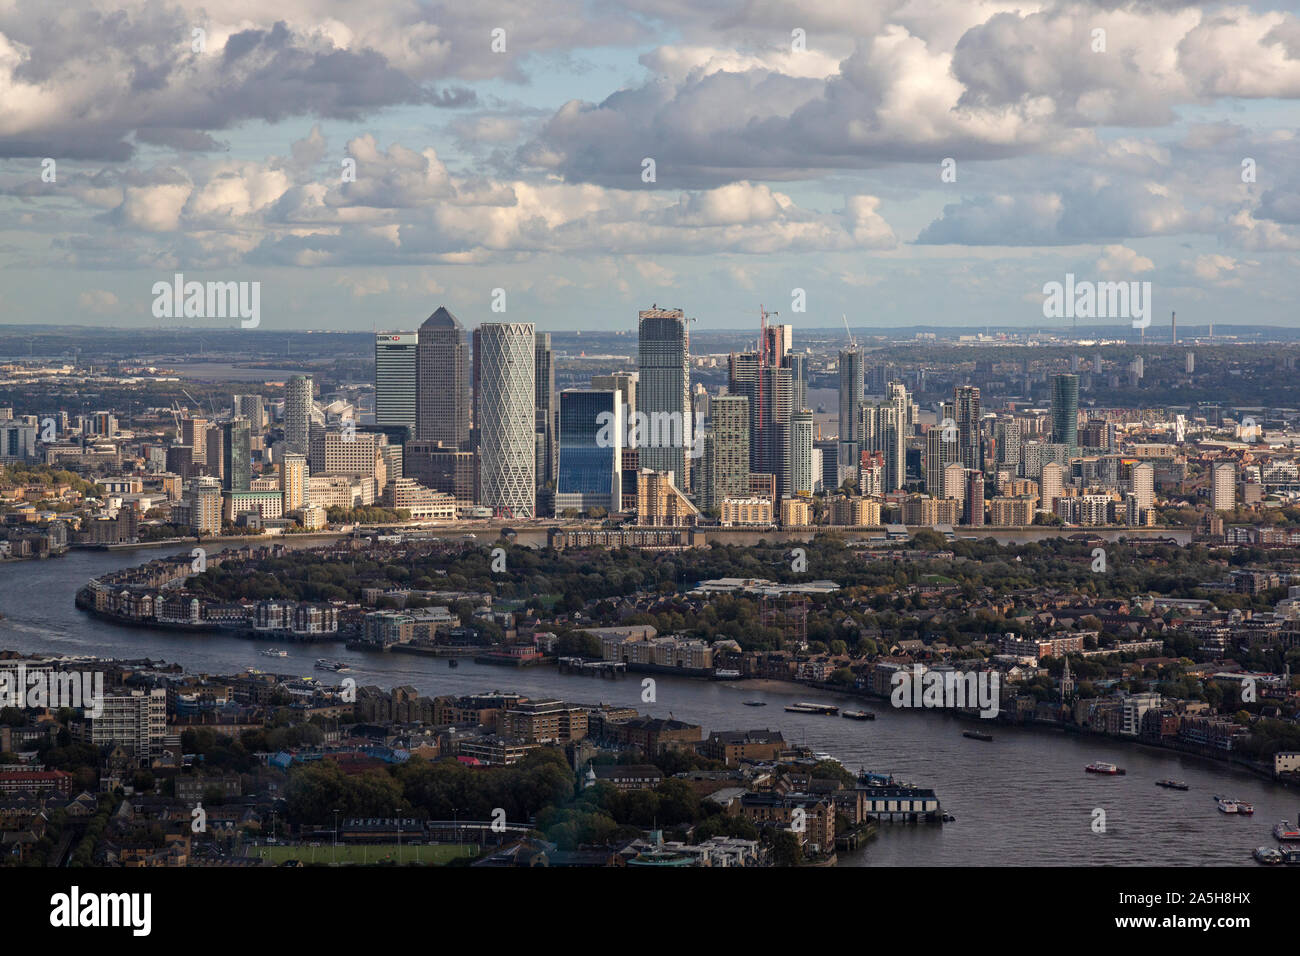 An aerial view looking east up the River Thames in London, with the buildings of Canary Wharf on the skyline. Stock Photo